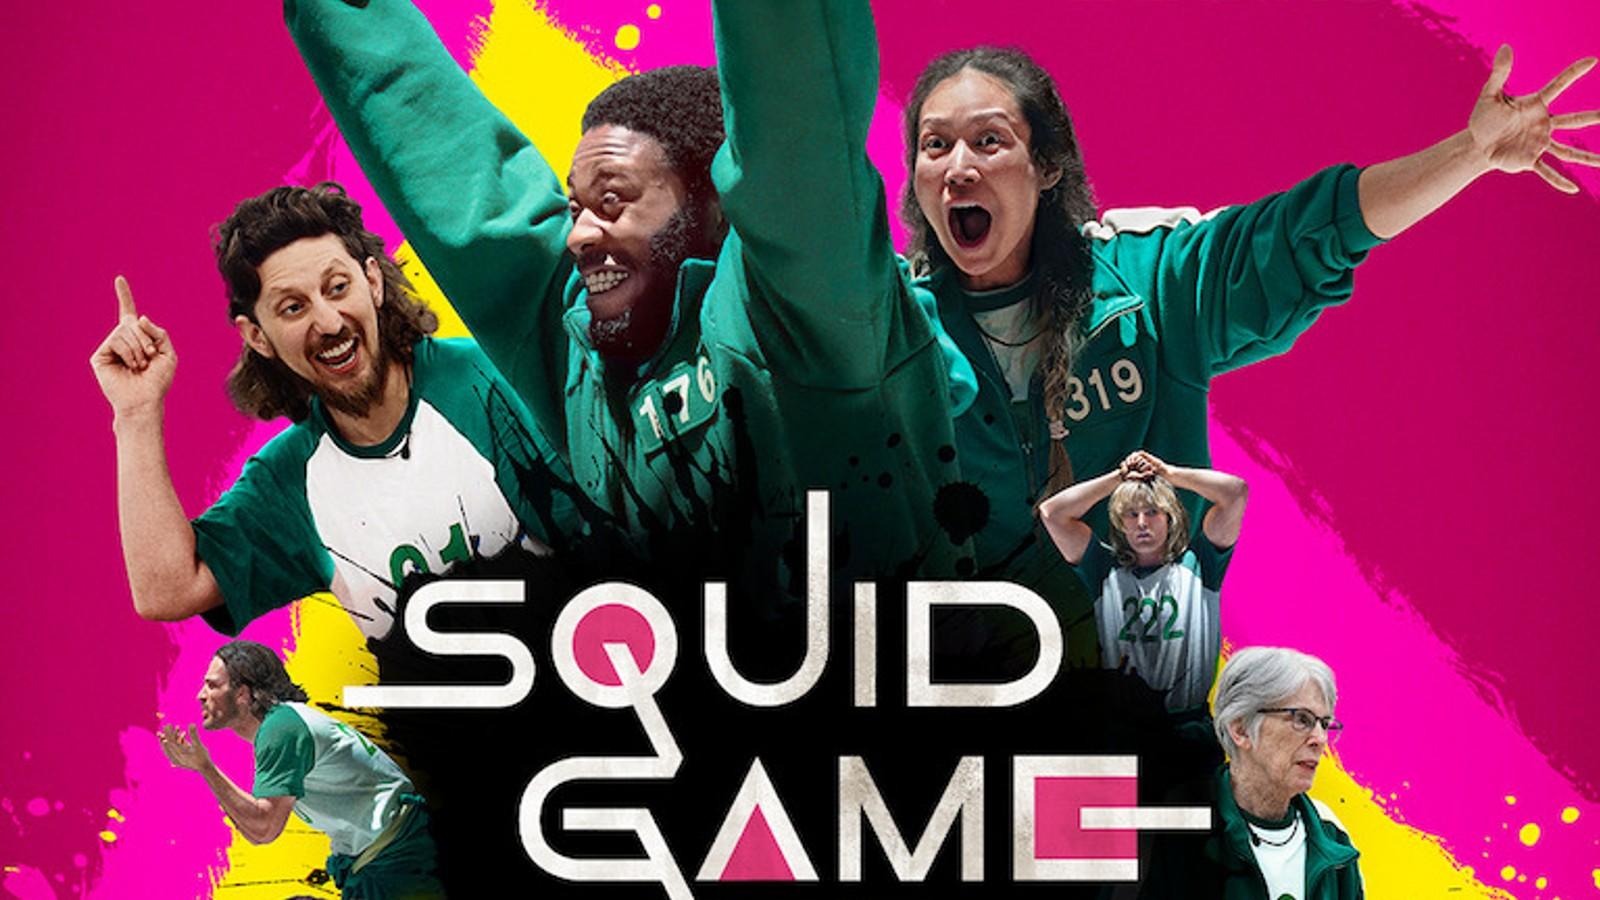 Squid Game: The Challenge – Review, Netflix